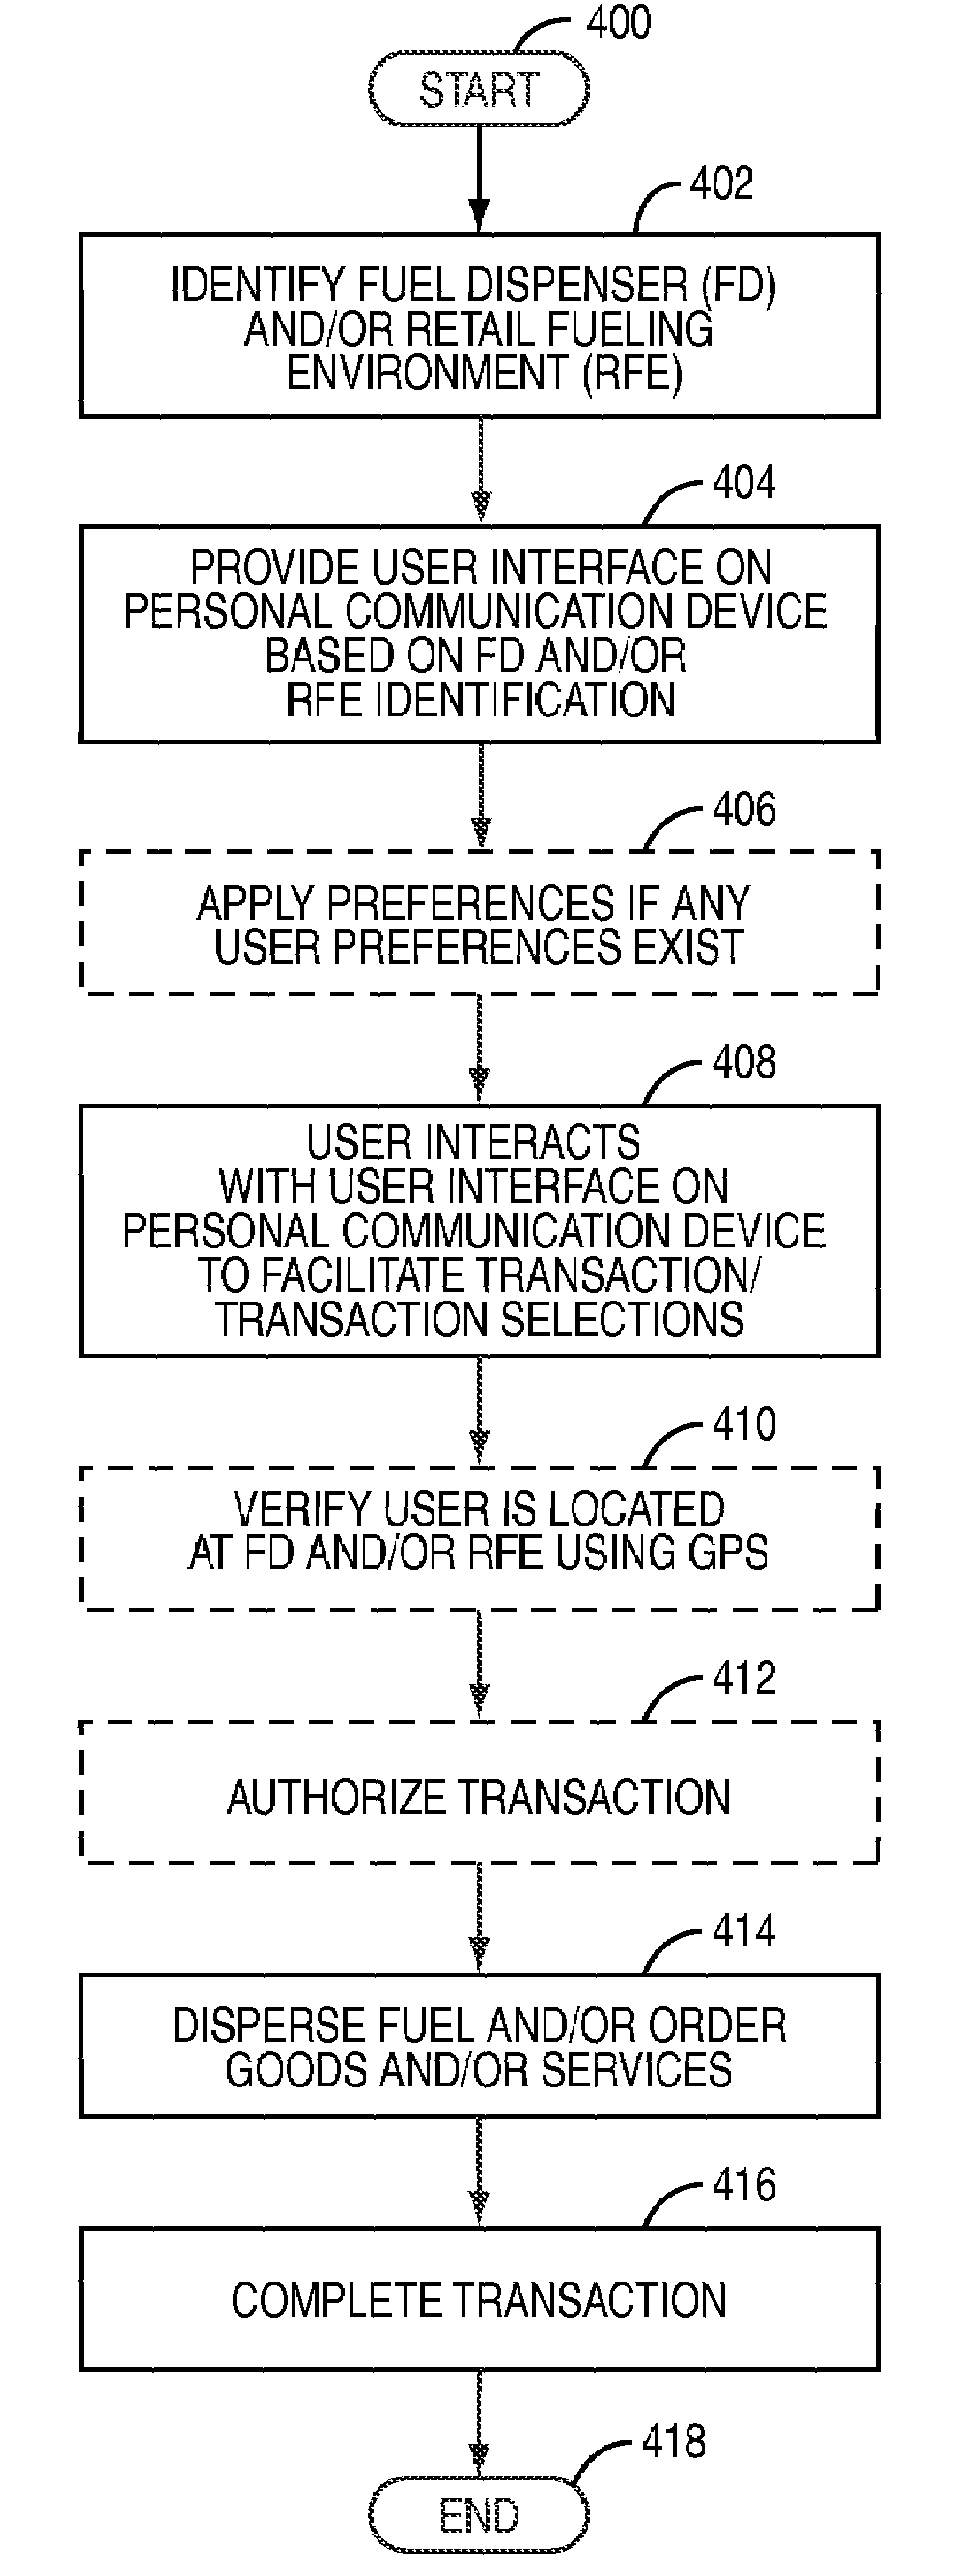 System and method for consumer notification that an order is ready for pick up via an application-specific user interface on a personal communication device